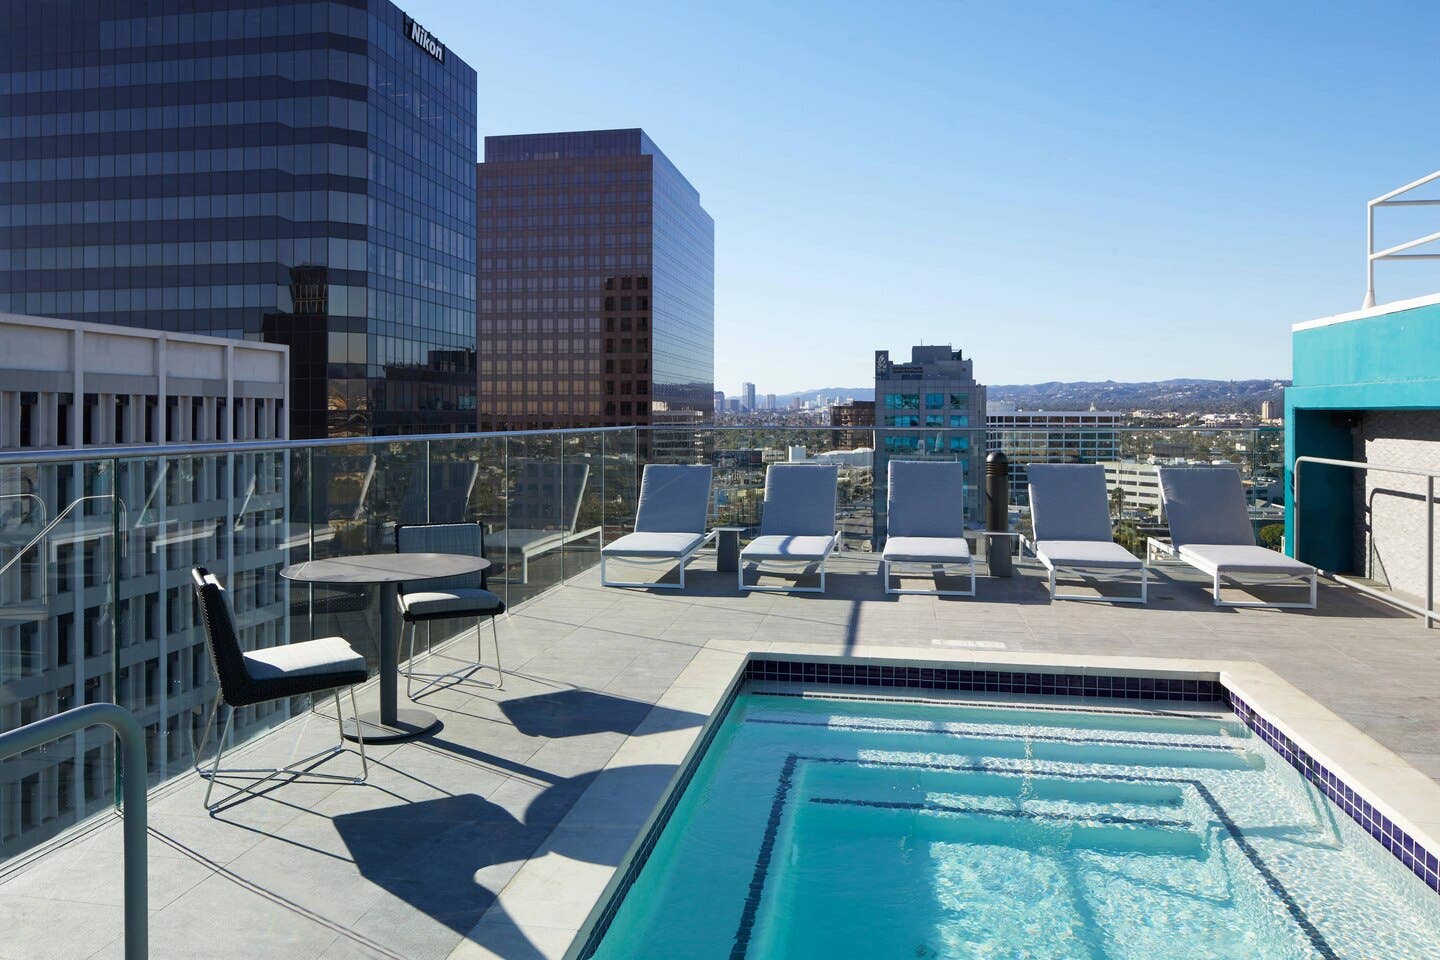 Rooftop wading pool at the AC Hotel Beverly Hills